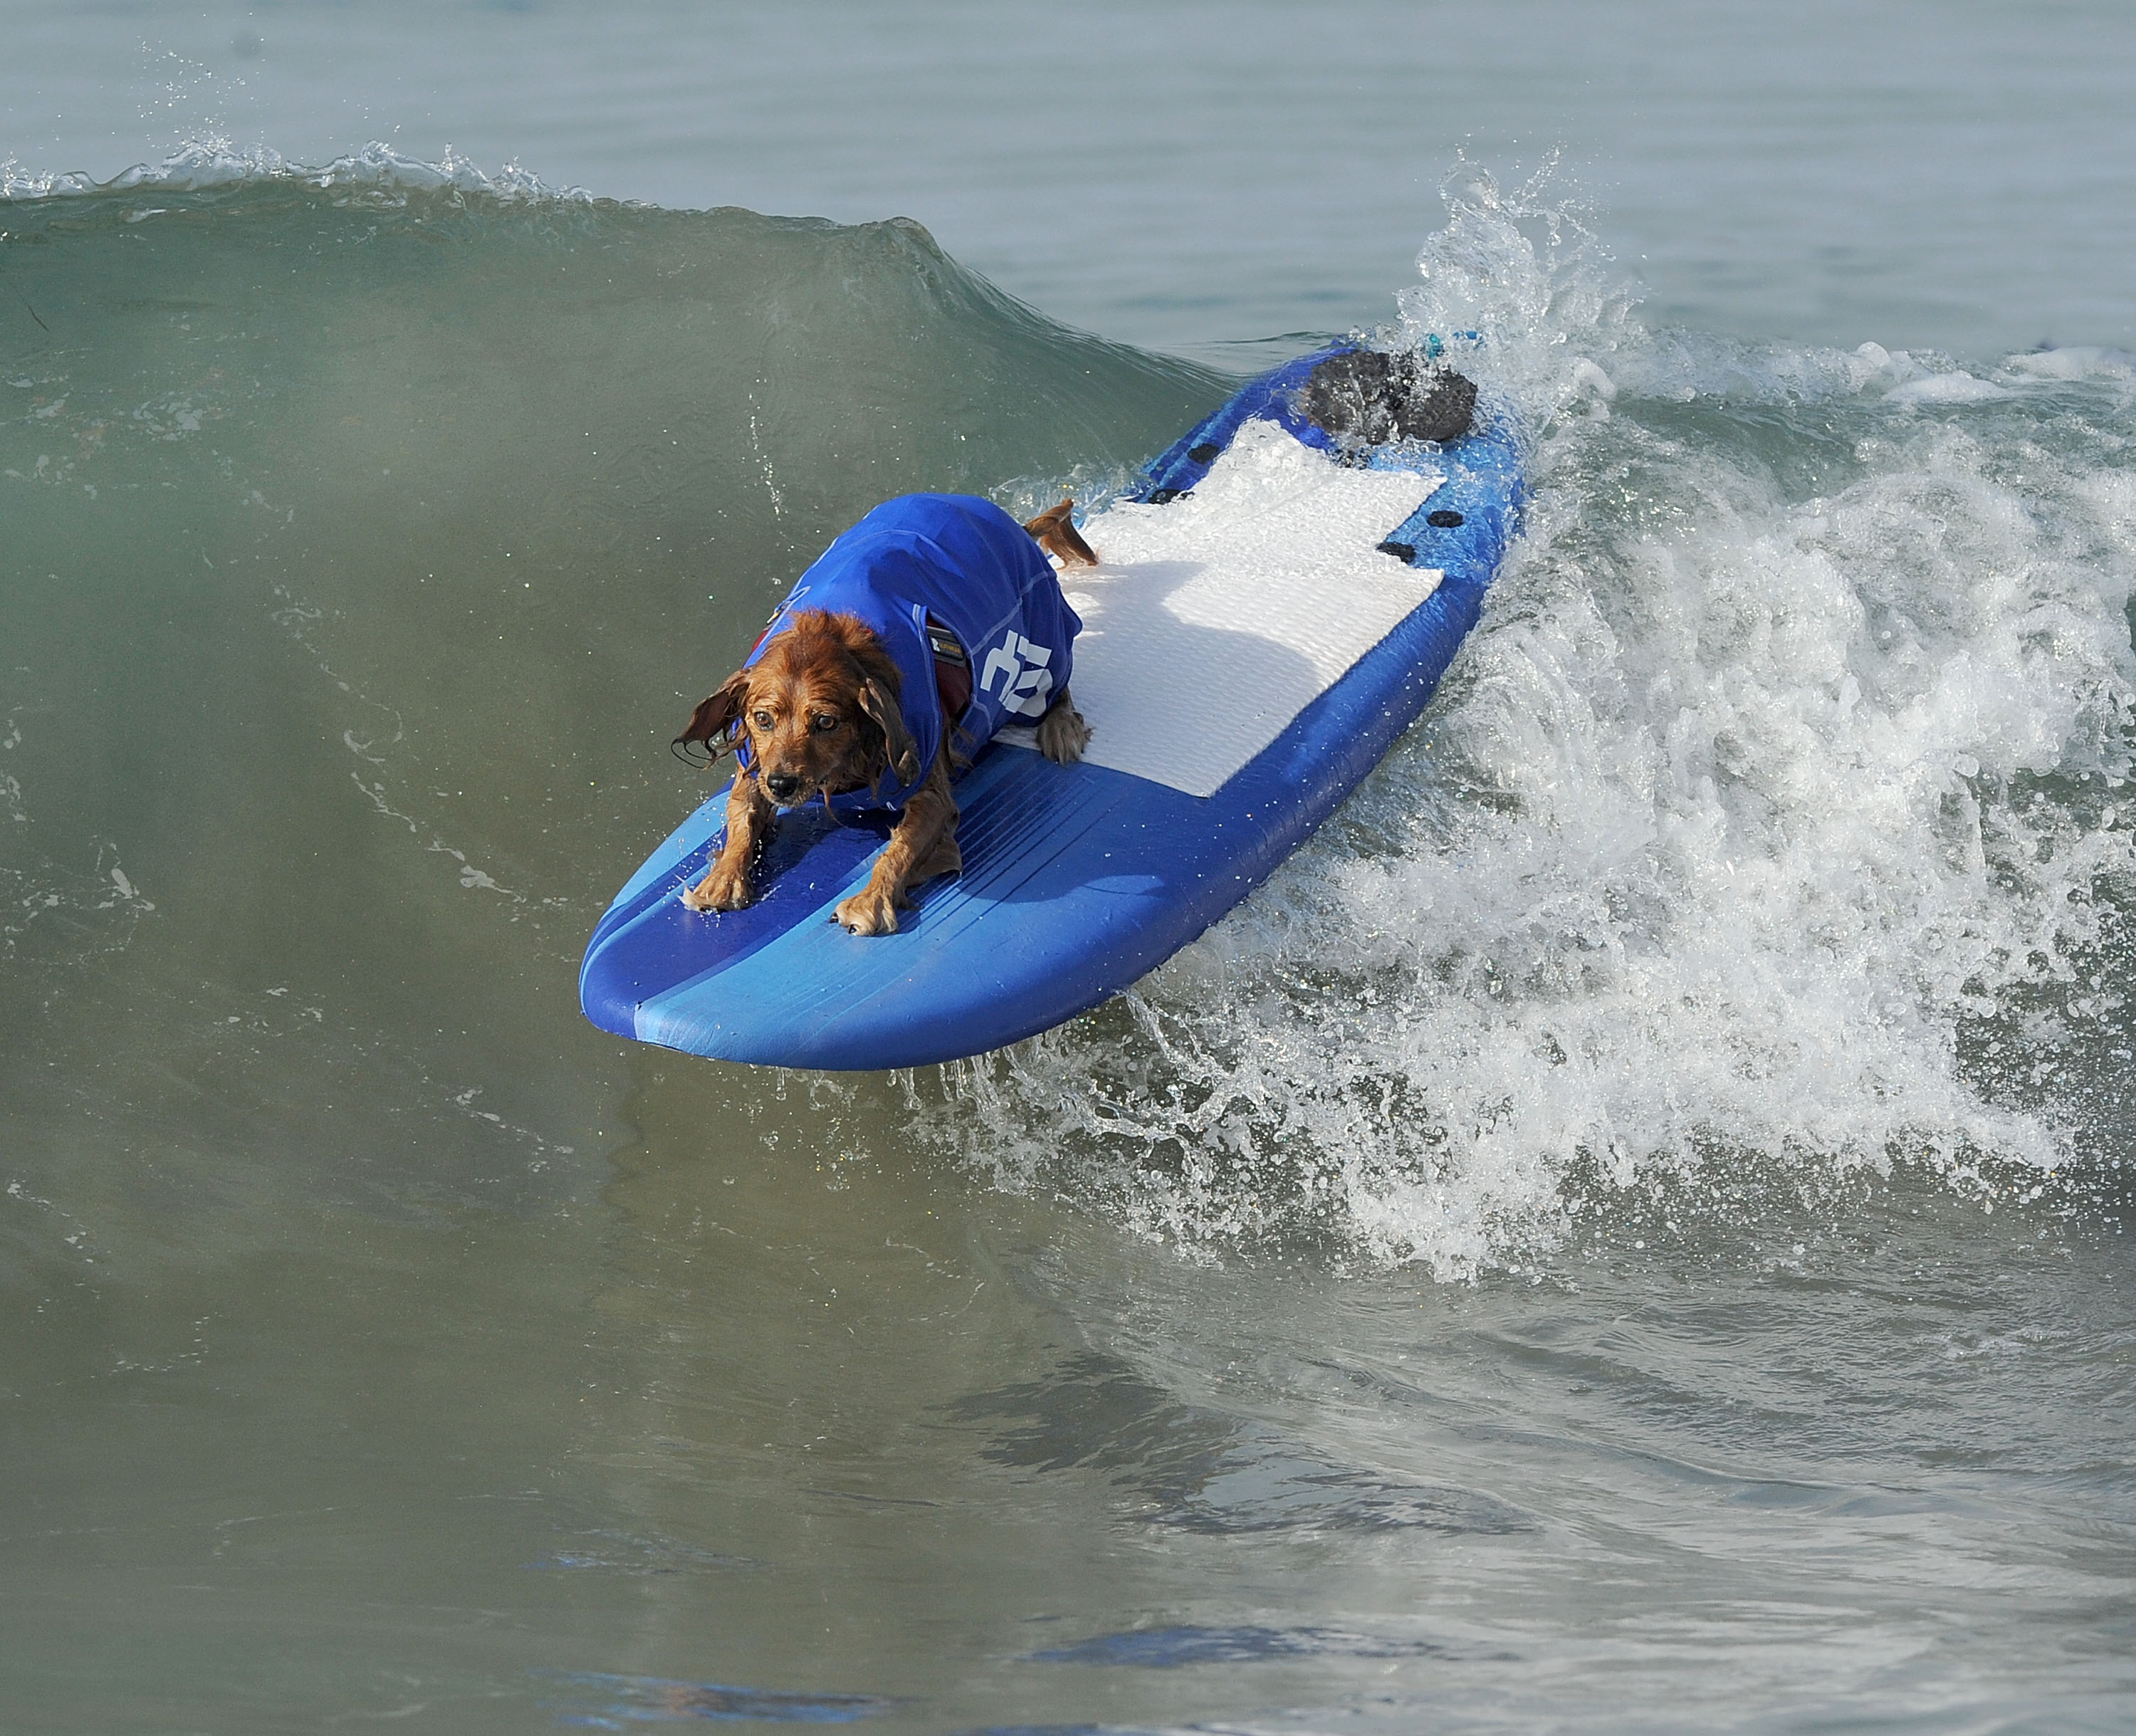 An incredible group of dogs participated in a surfing competition in